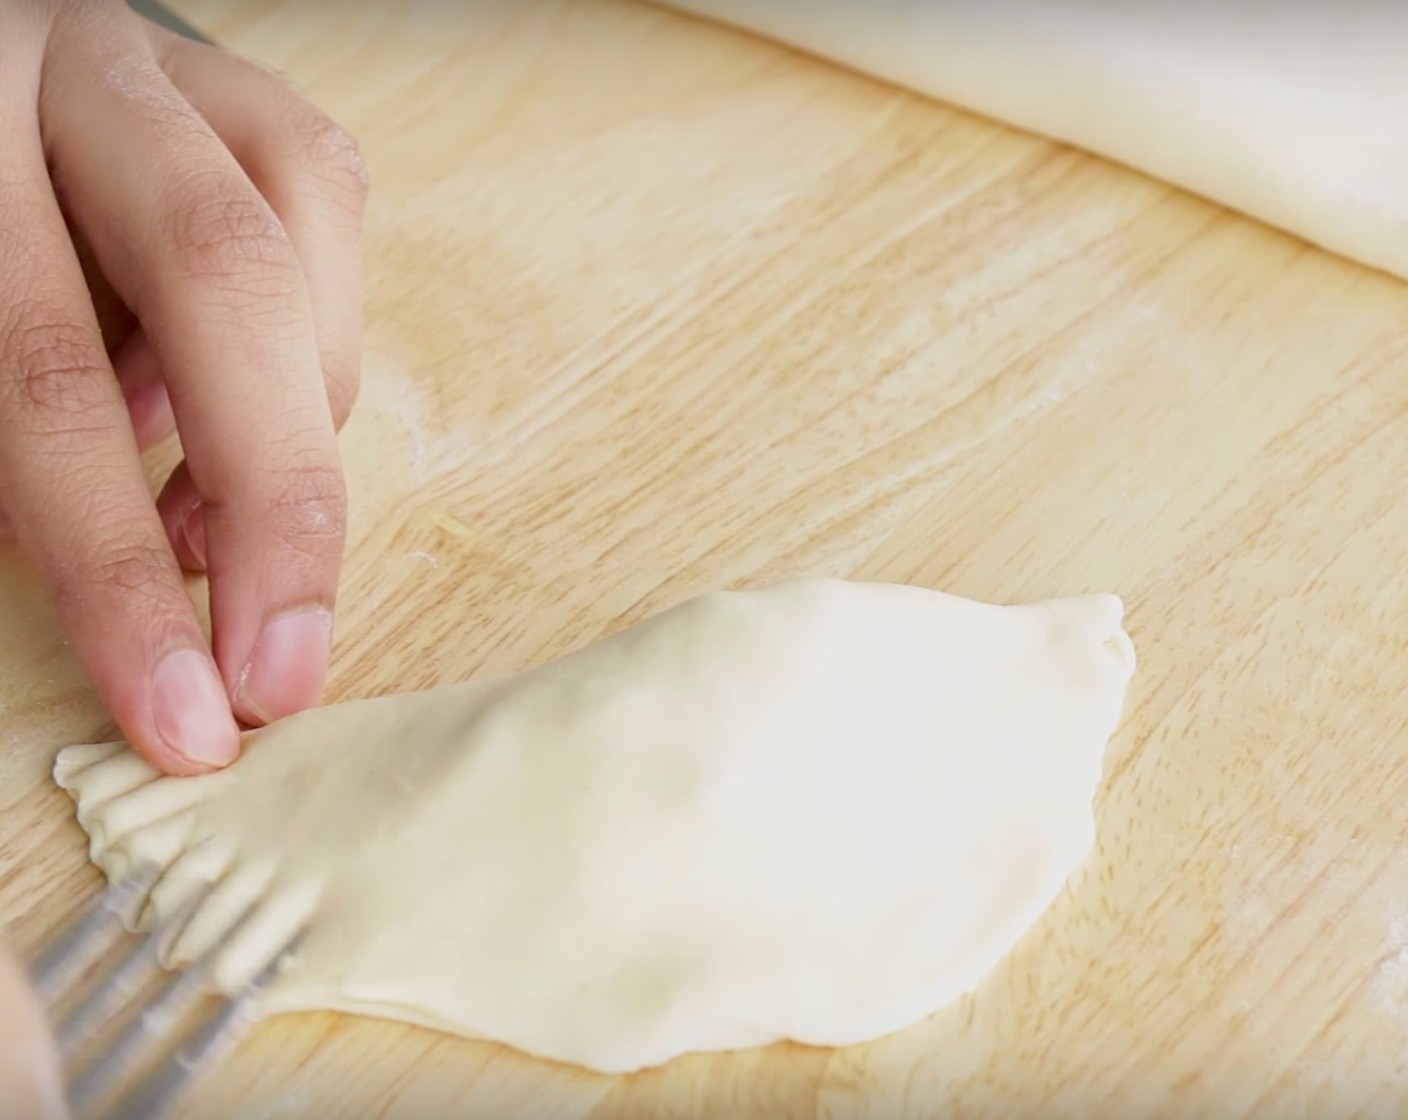 step 8 To assemble the empanadas, place a spoonful of the chicken filling on the middle of each empanada disc. Add a sprinkle of Mozzarella Cheese (to taste) if you want. Fold the disc and seal the edges by pressing the dough with a fork dipped in flour.